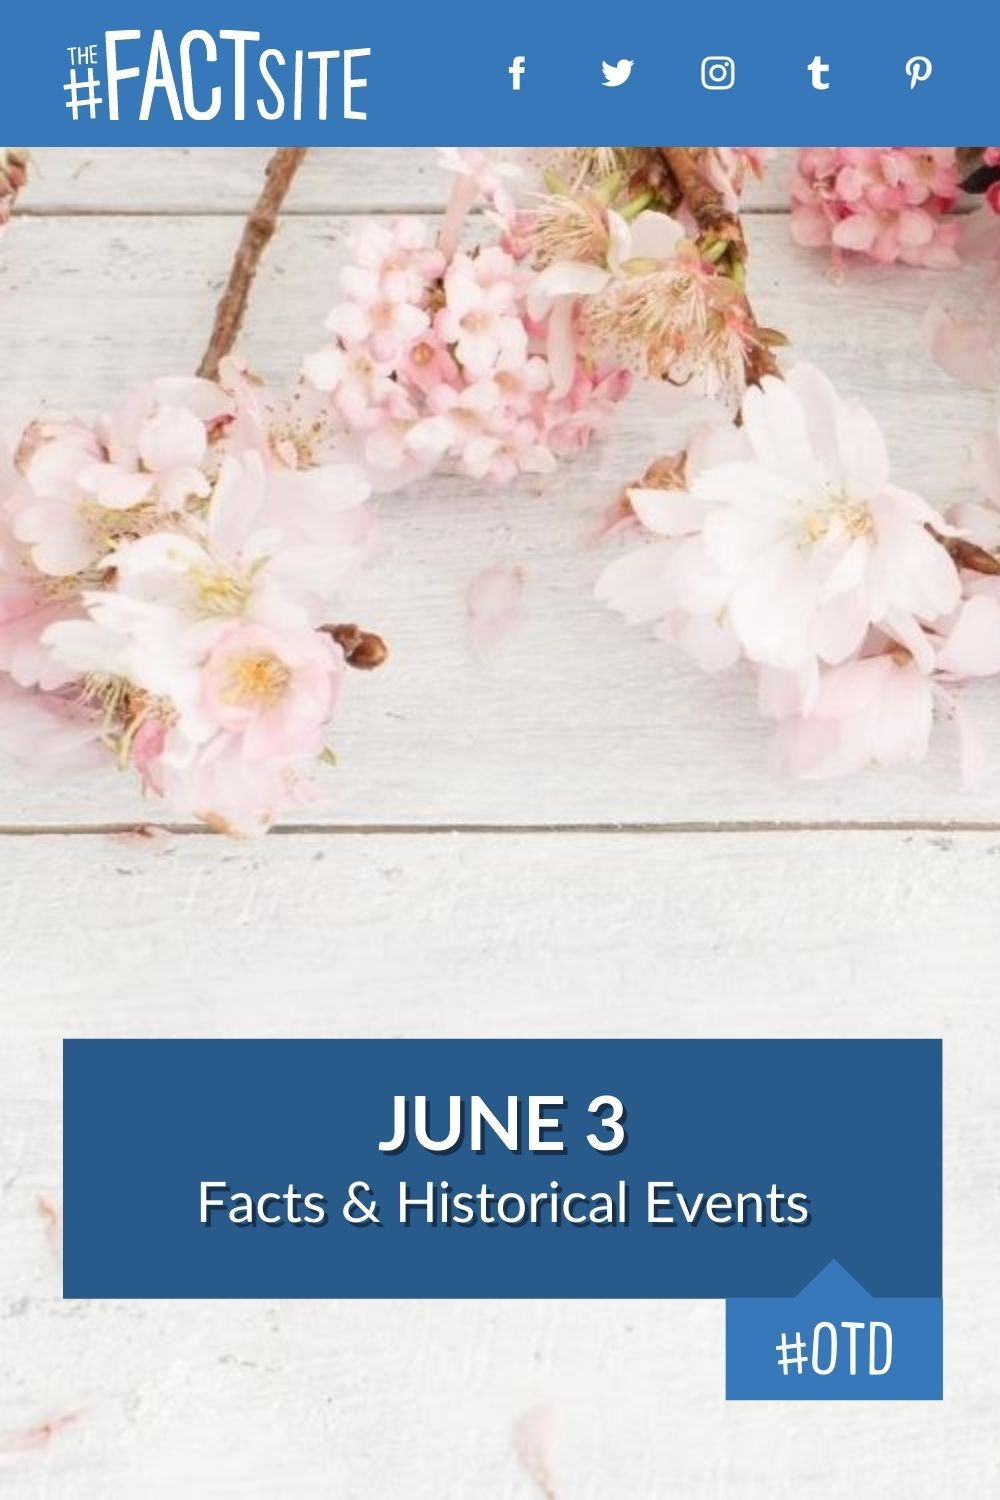 Facts & Historic Events That Happened on June 3